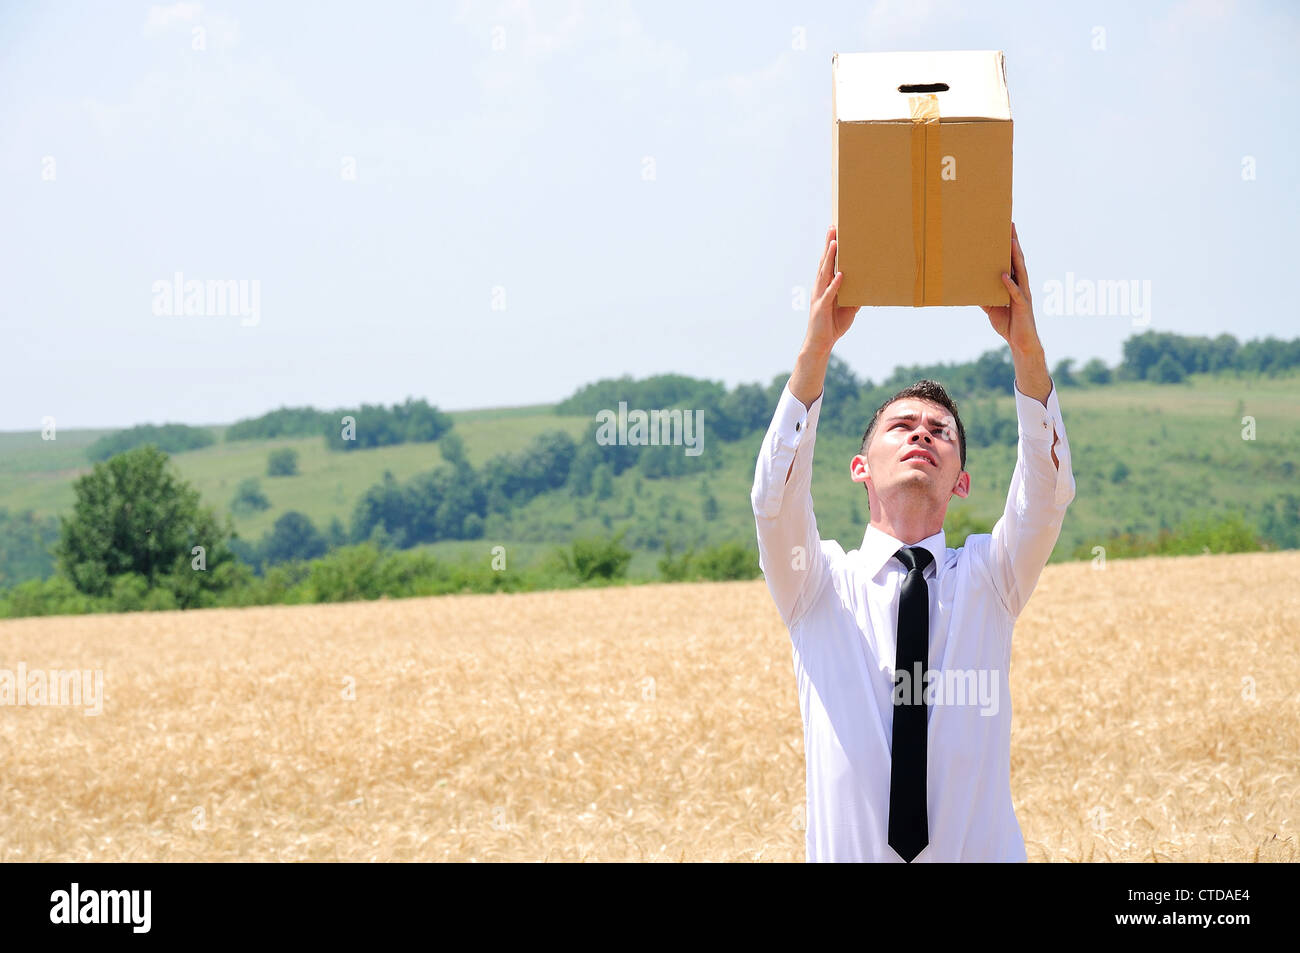 Business man delivering box in wheat Stock Photo